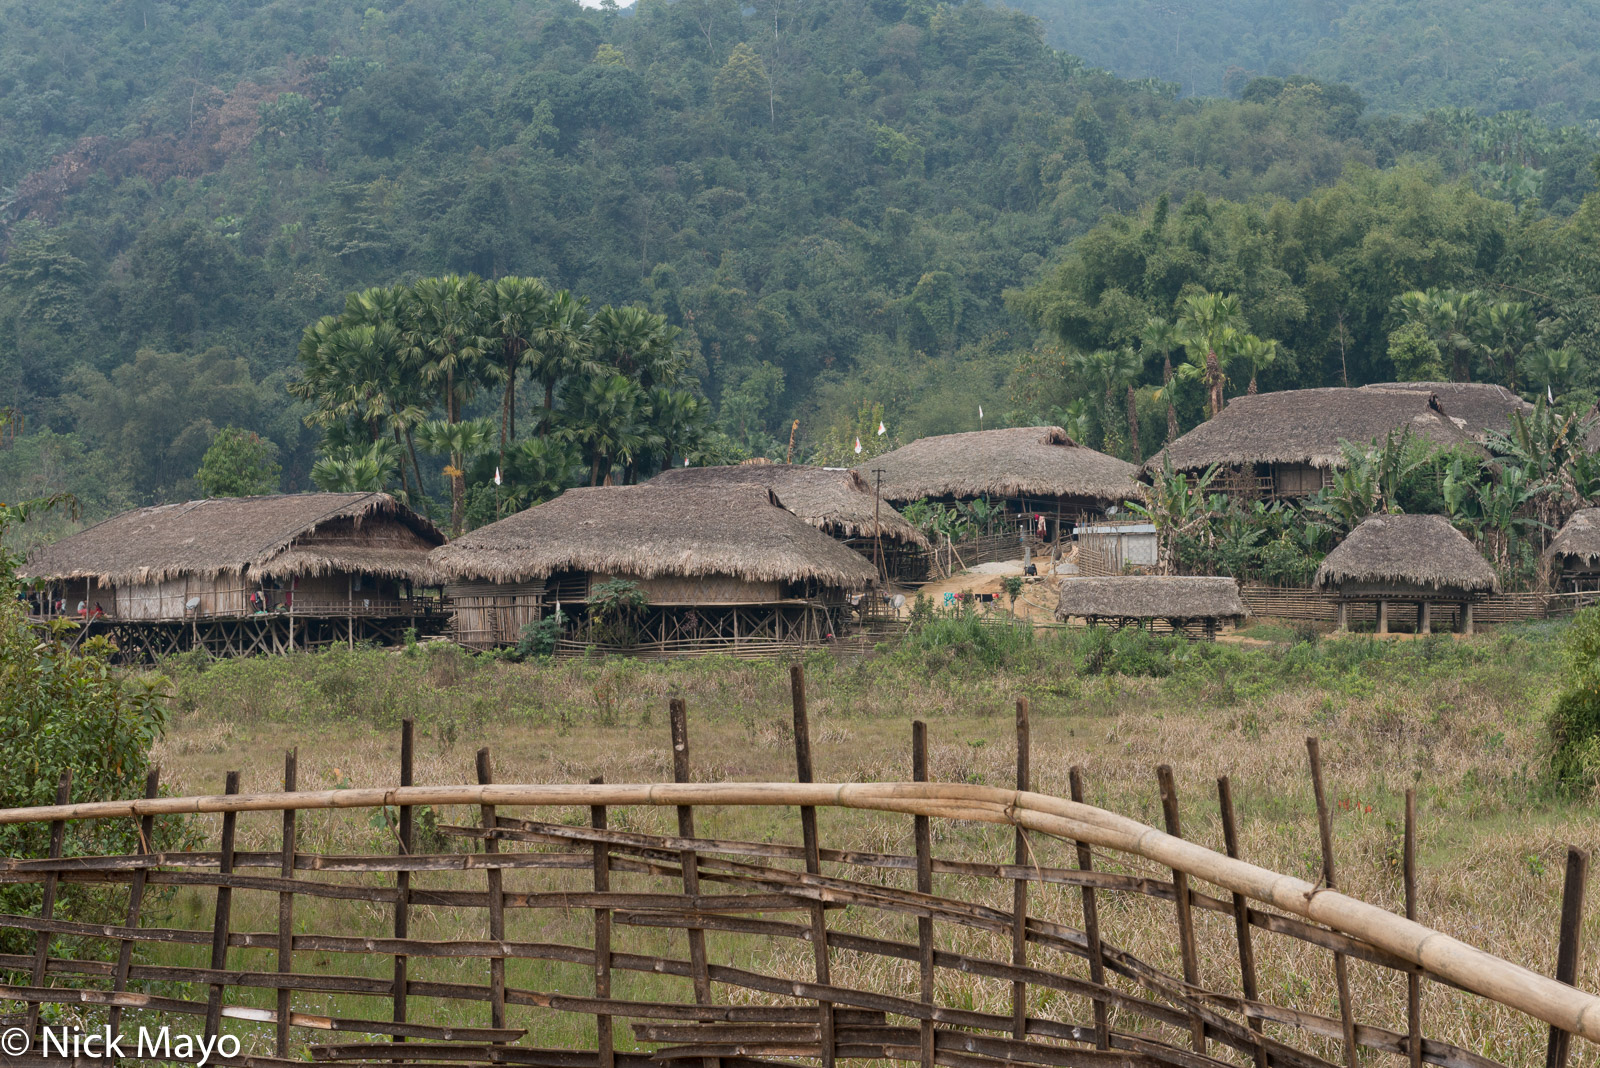 Thatched houses in the Adi Minyong village of Karang.